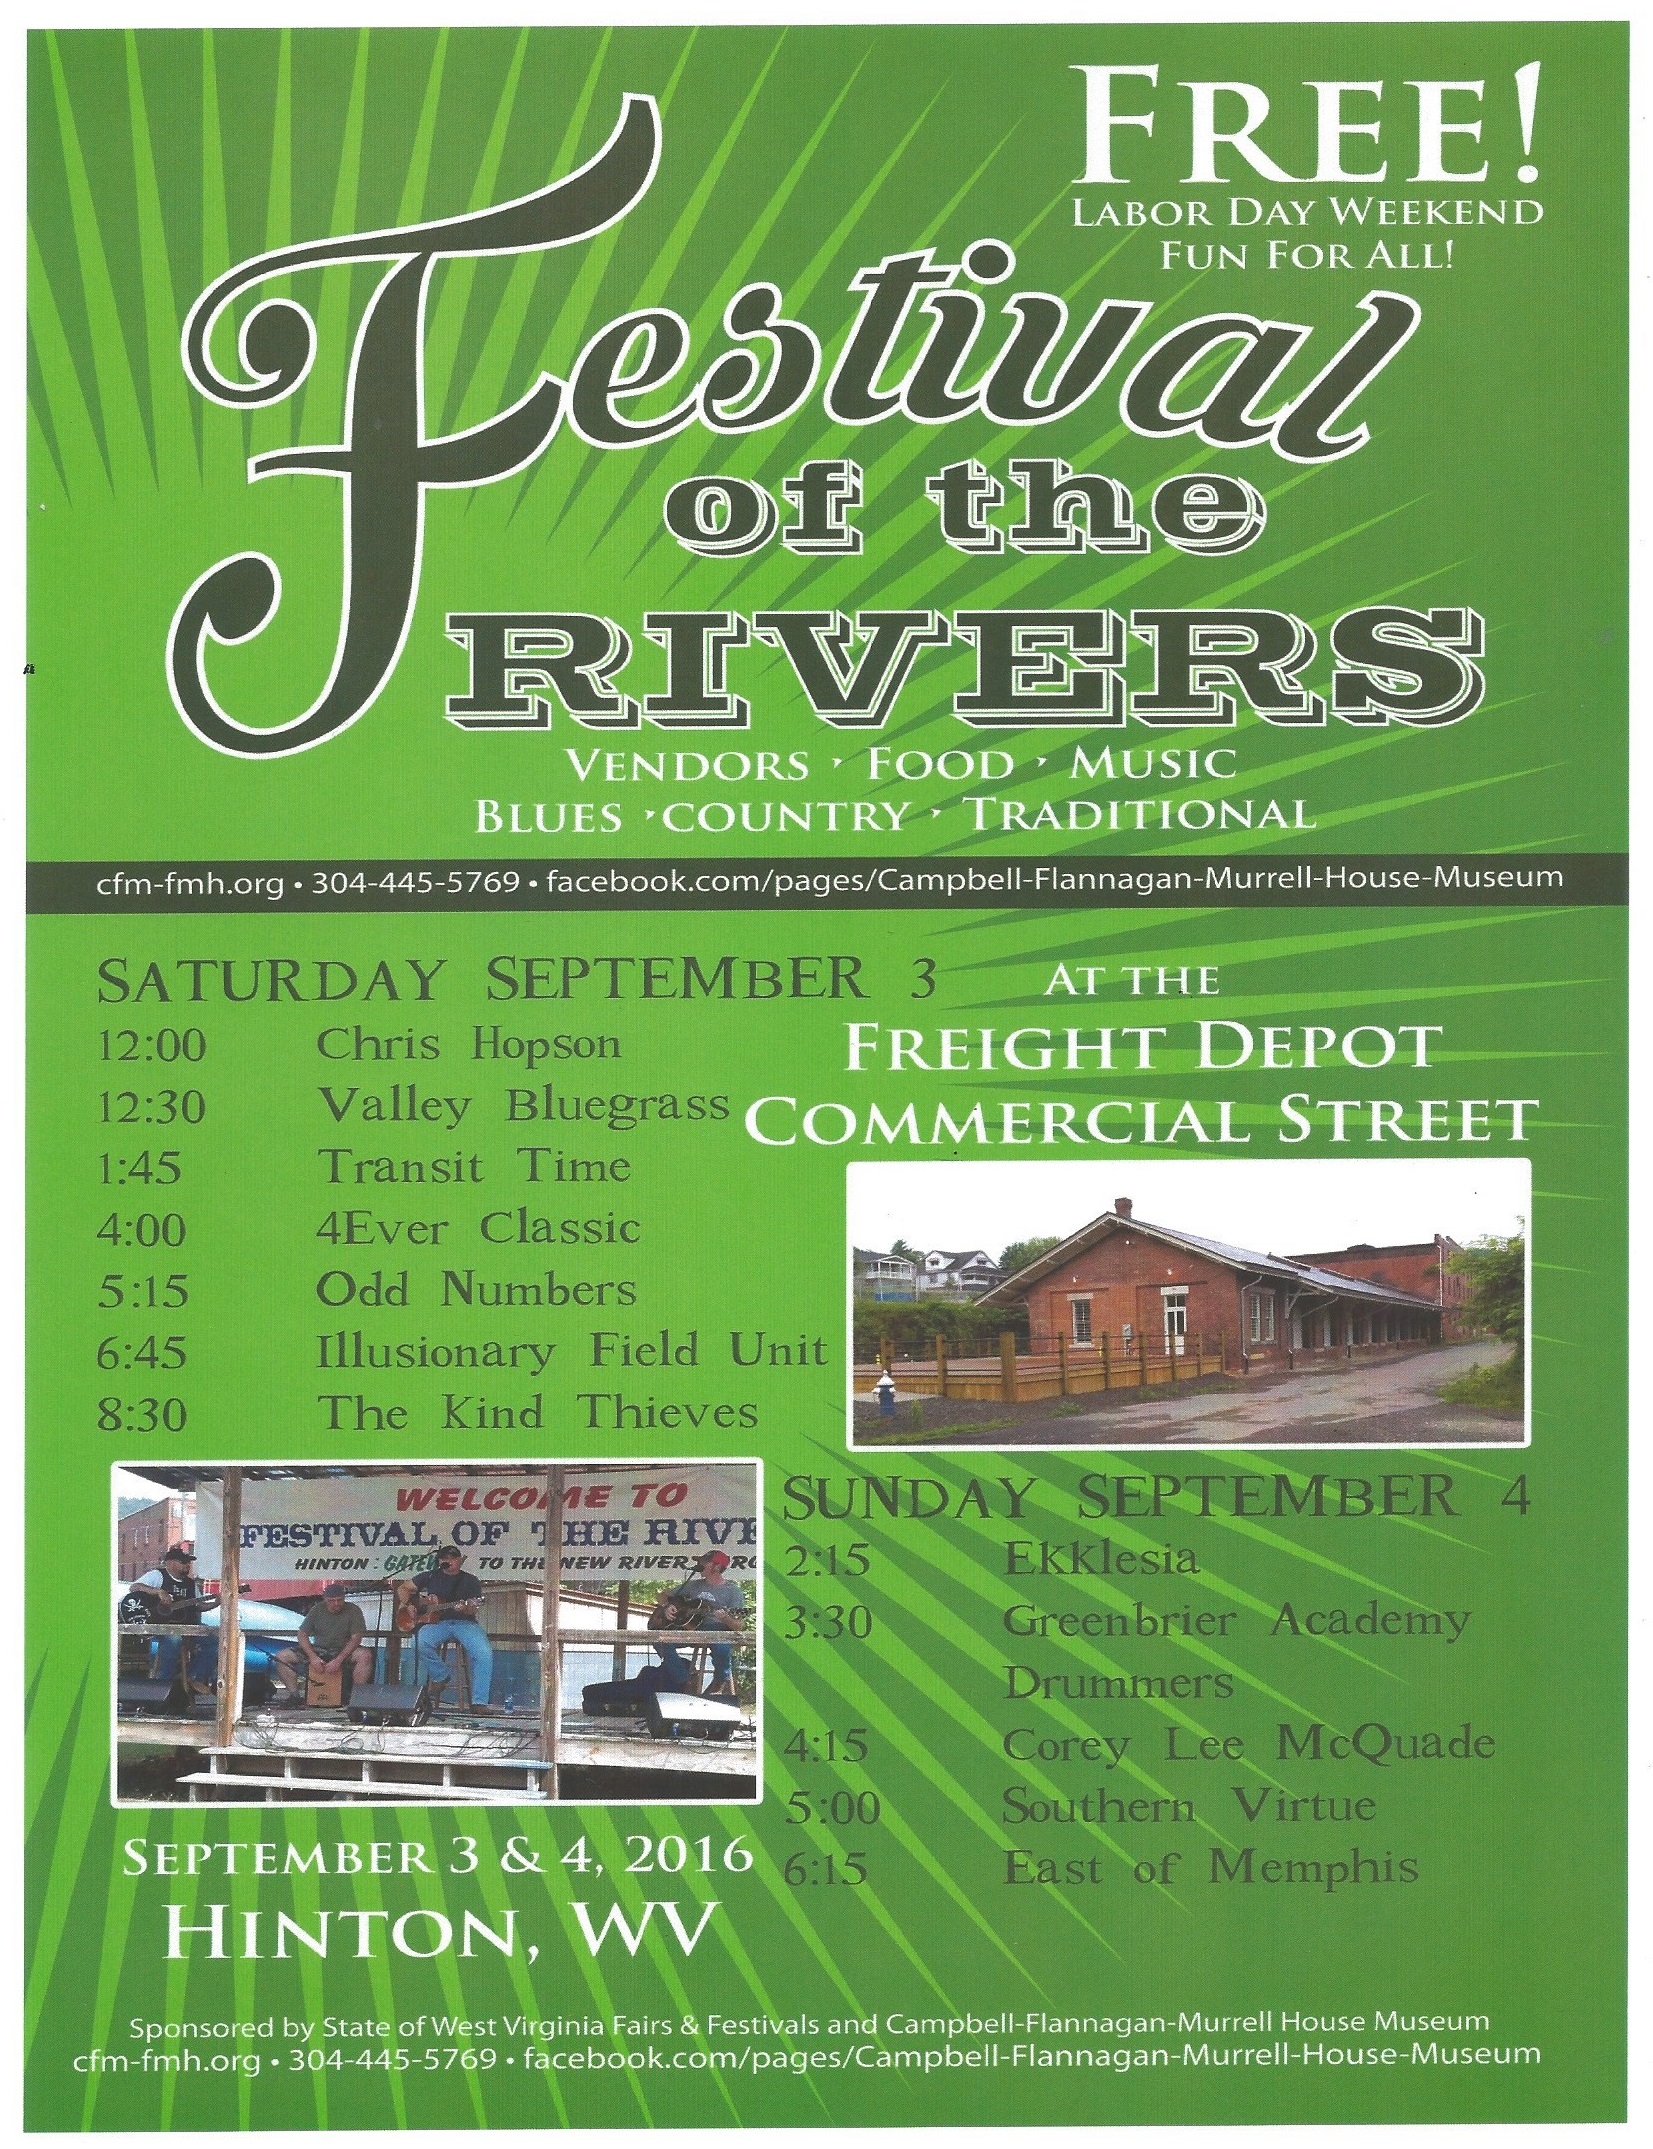 Festival of the Rivers